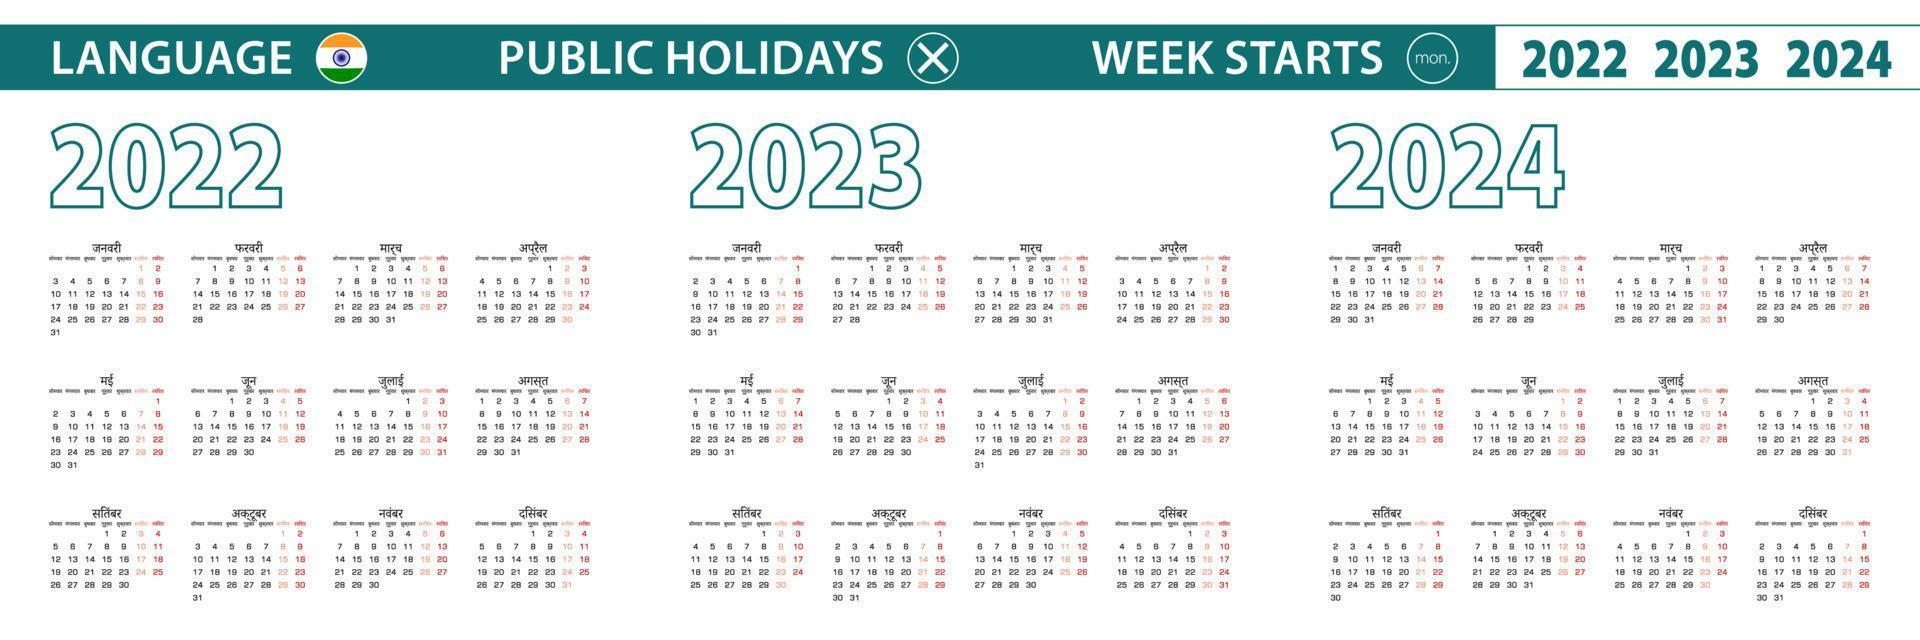 Simple calendar template in Hindi for 2022, 2023, 2024 years. Week starts from Monday. vector